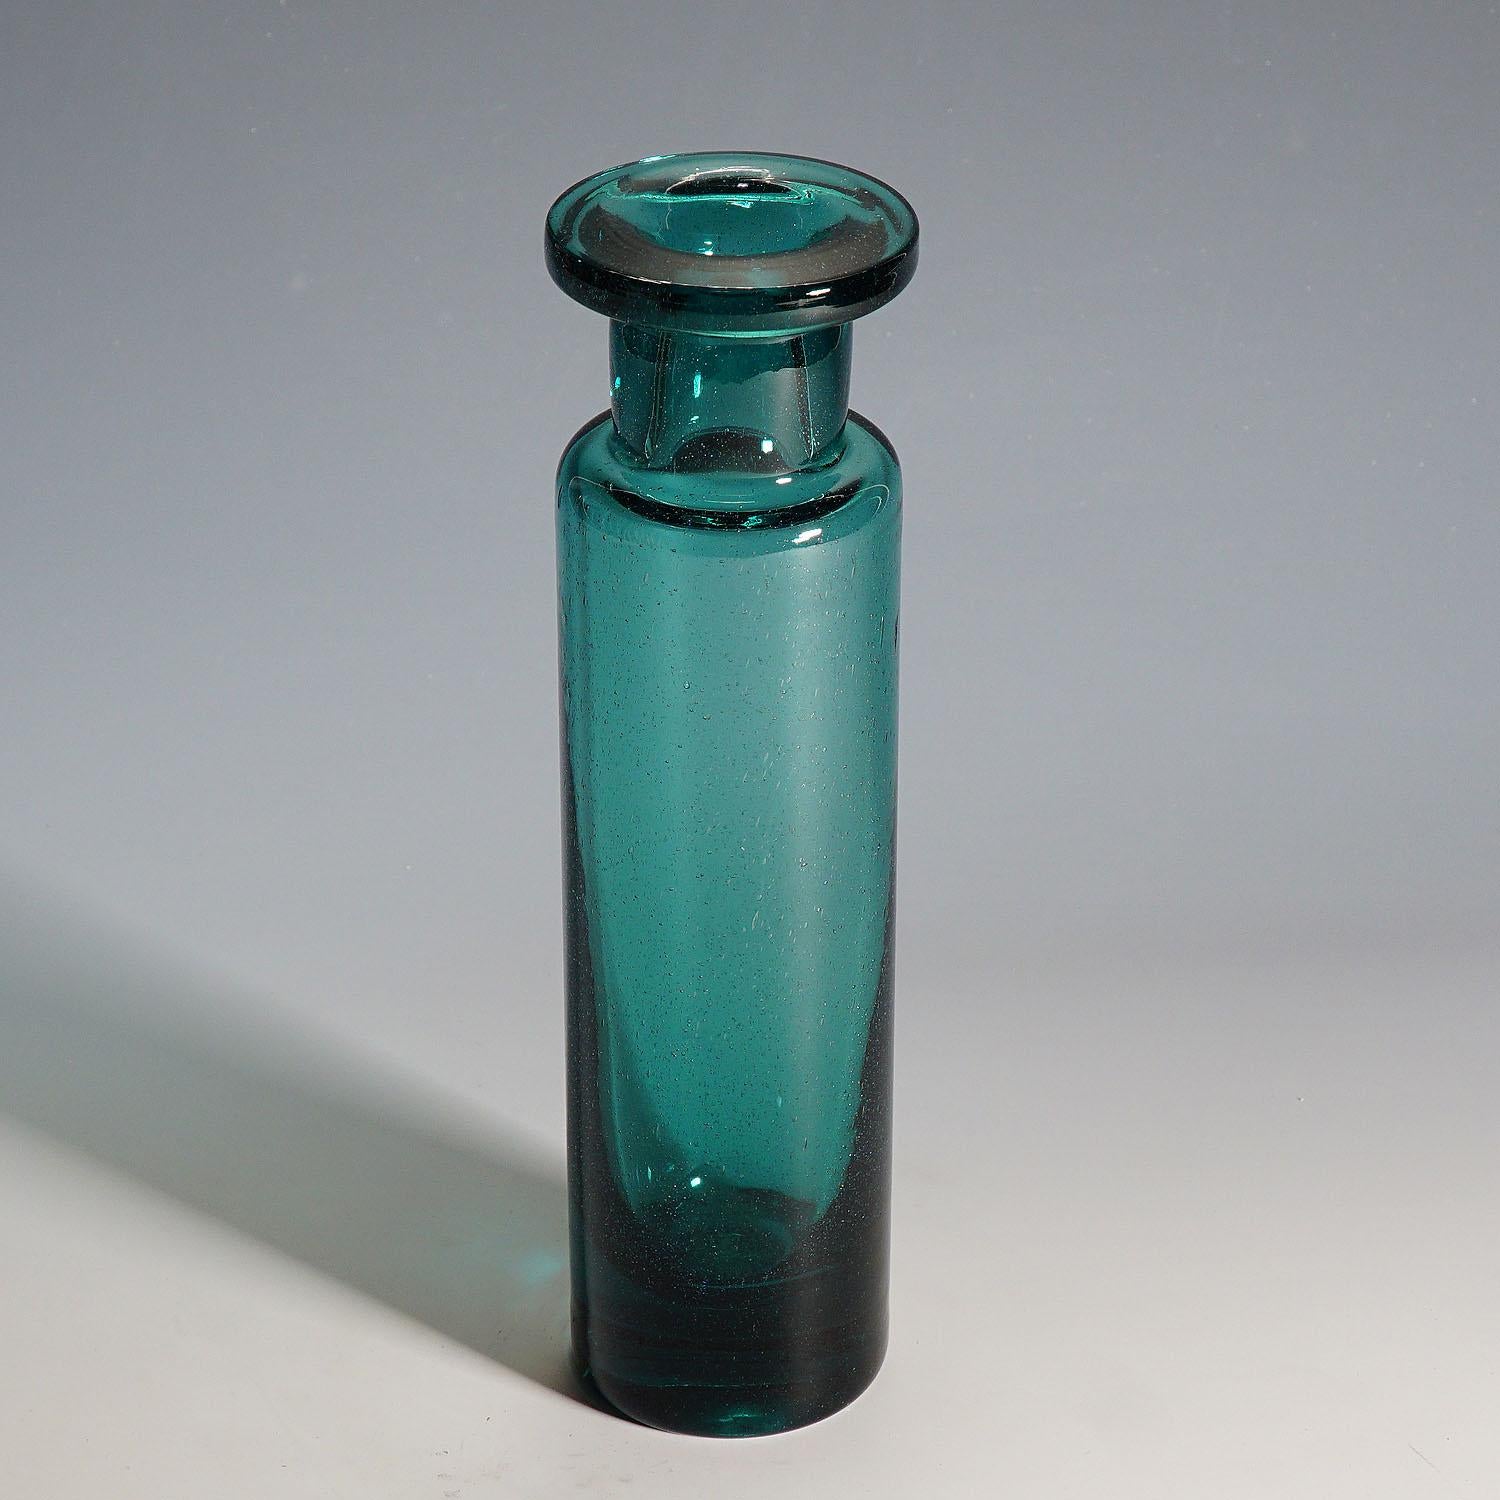 A vintage glass vase manufactured in massive petrol colored glass with fine air bubbles inside. Manufactured by the Ichendorfer Glassworks, Germany around 1960. The Ichendorfer Glassworks issued a series of replicas of antique Roman Aryballos glases